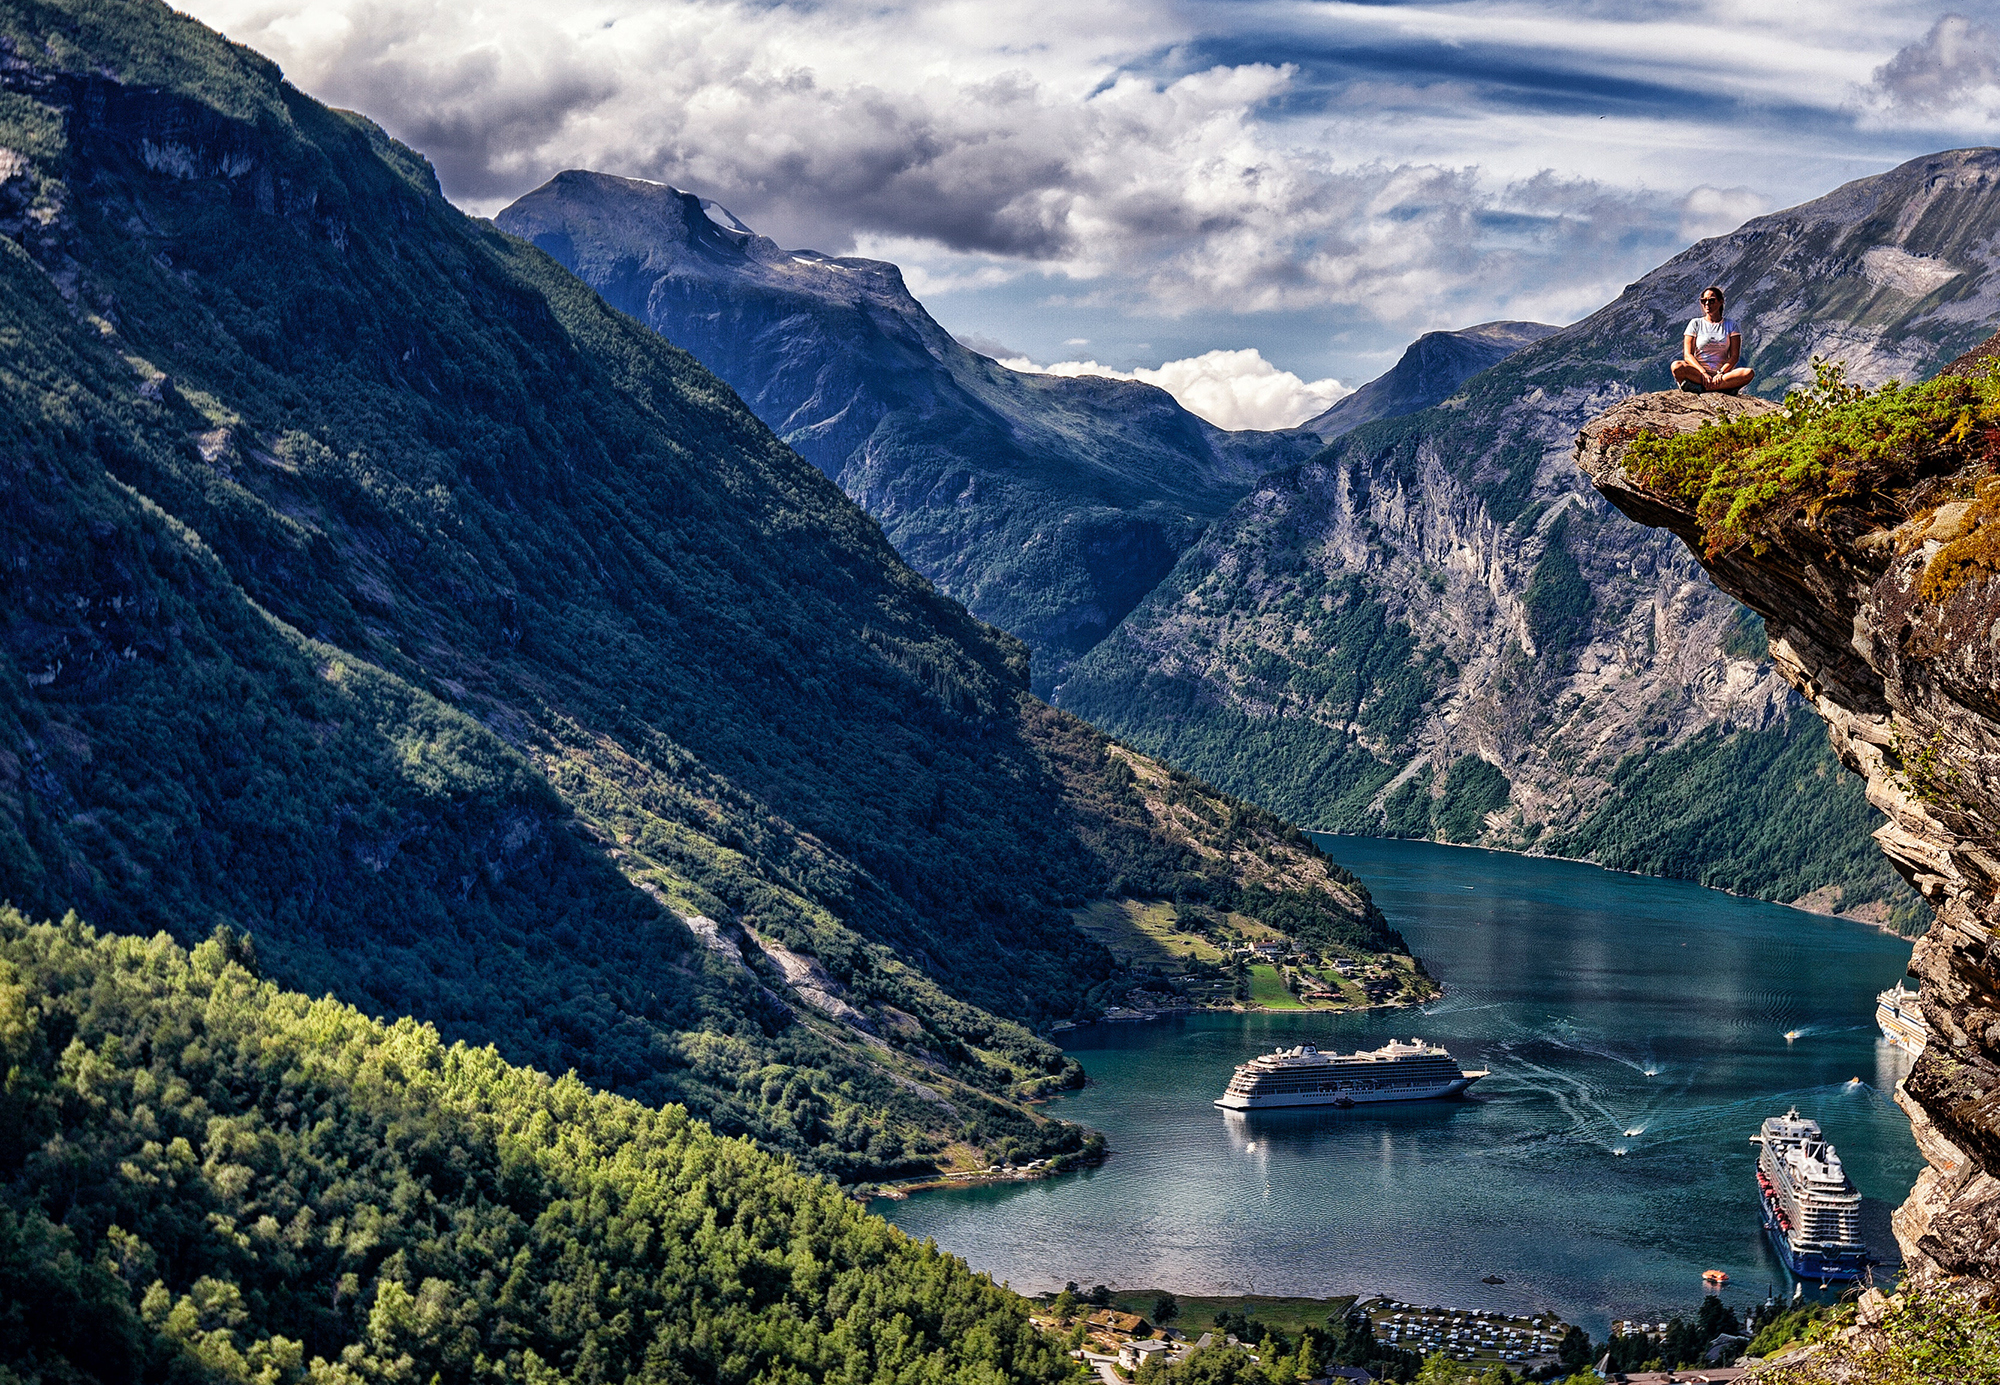 A Geiranger view, this Norwegian UNESCO fjord is much visited by cruise vessels.